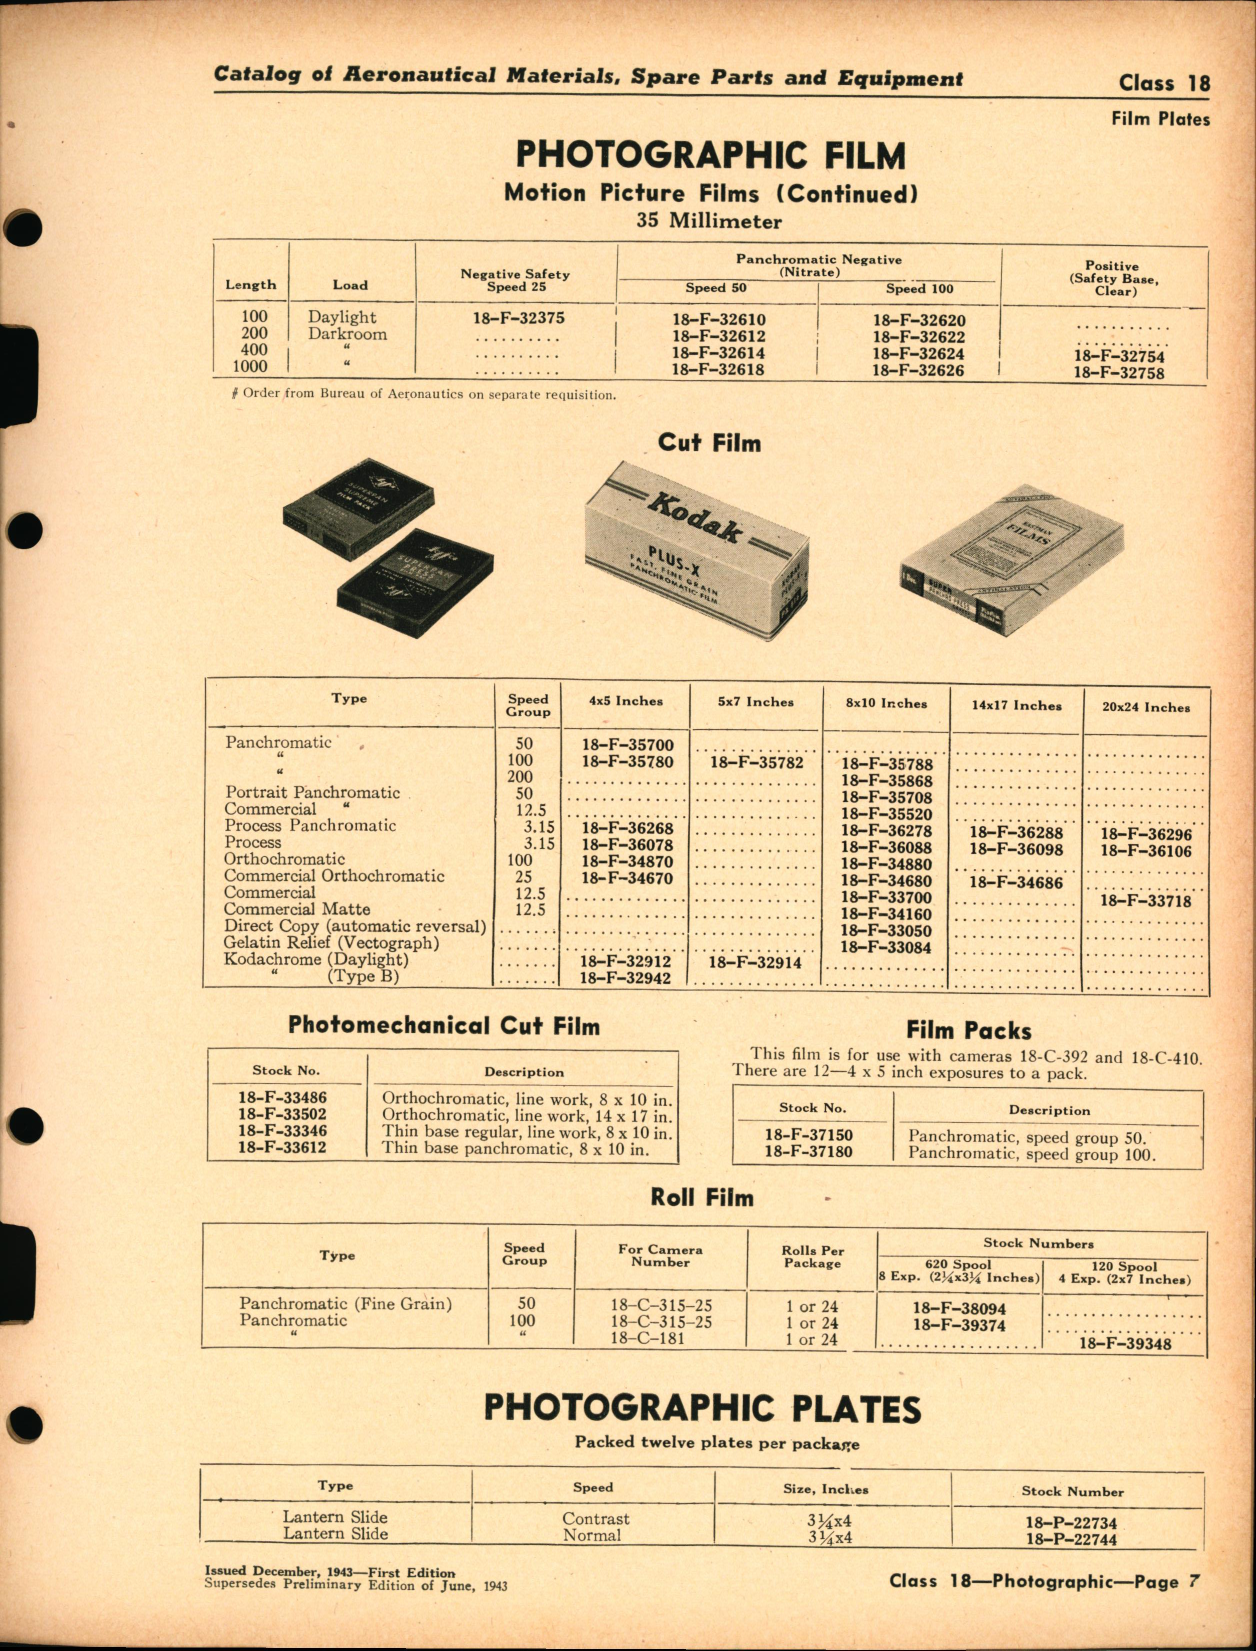 Sample page 7 from AirCorps Library document: Photographic Equipment and Supplies